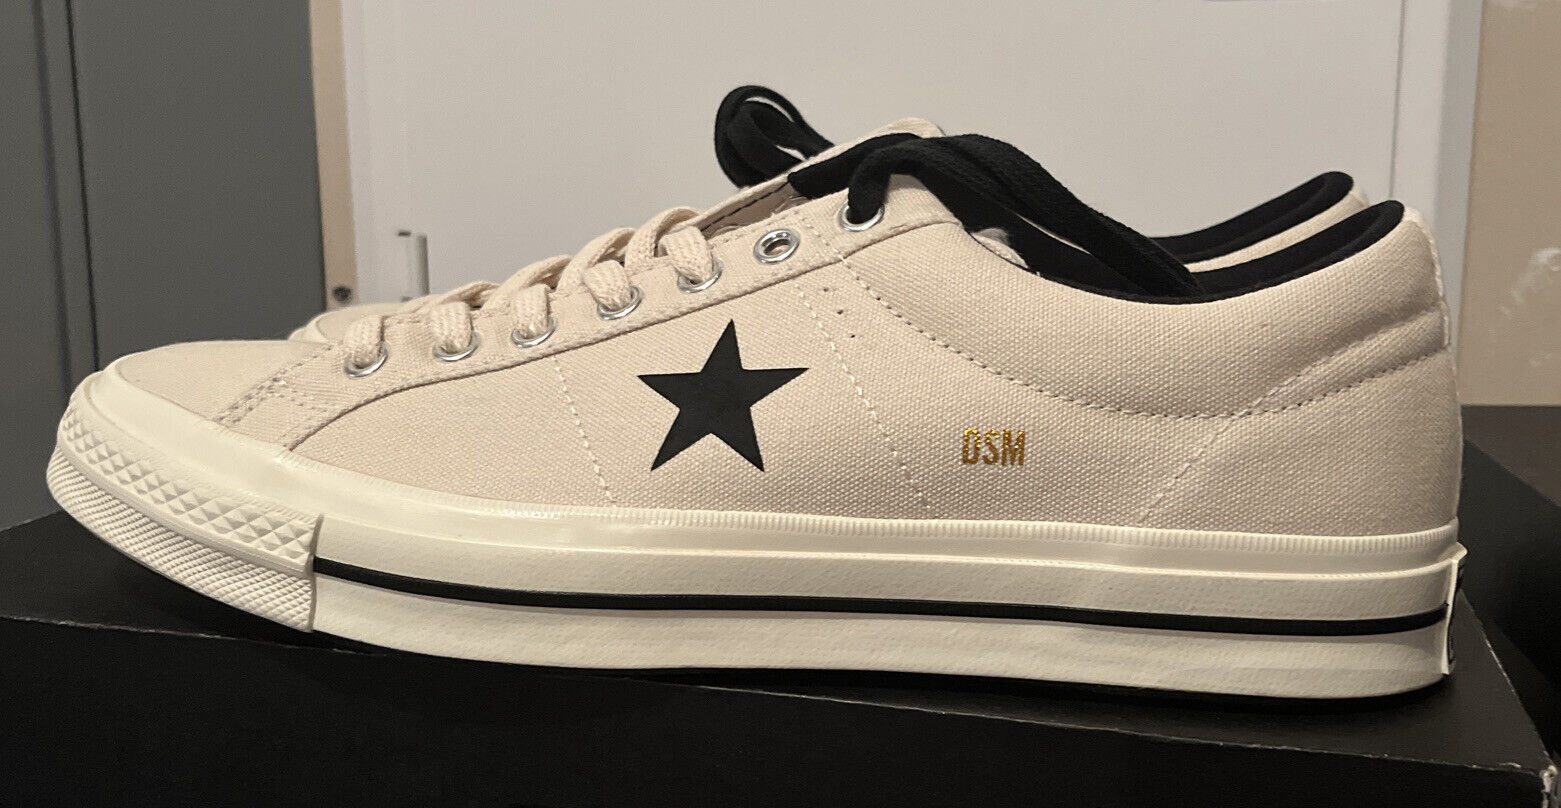 Converse x DSM Dover Street Market One Star Low Top Mens Size